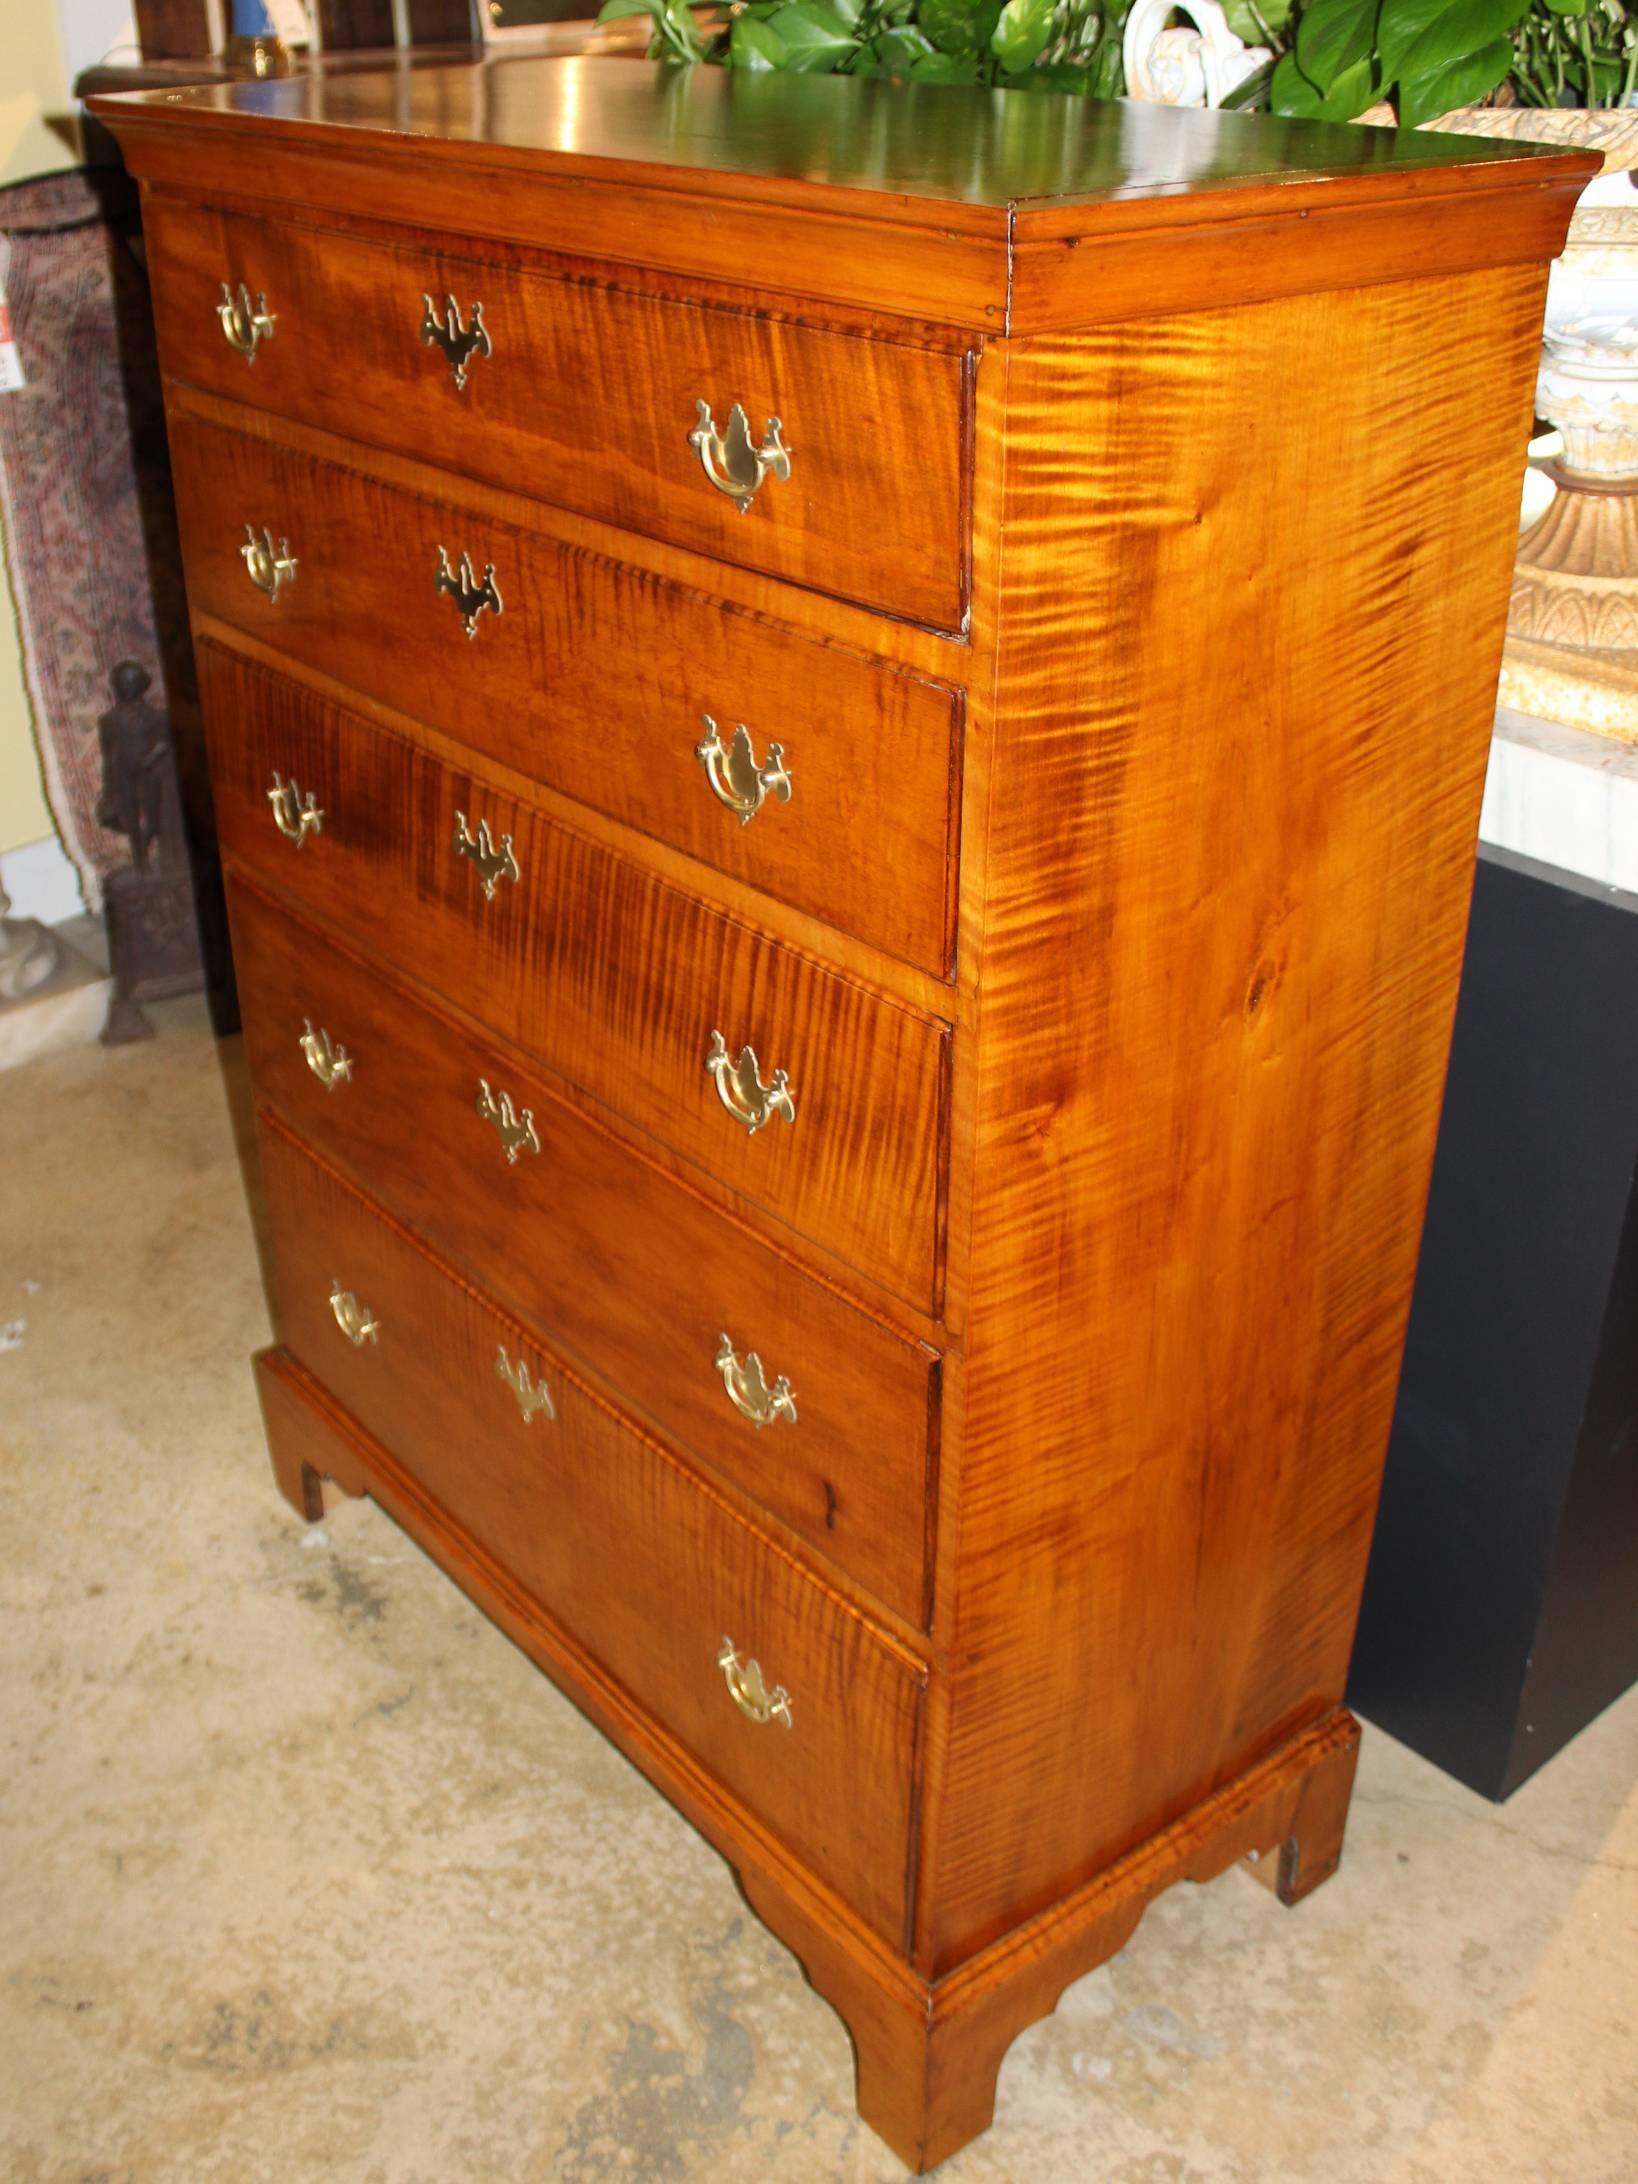 A fine example of an 18th century New England Chippendale tall chest in bold tiger maple with molded cornice over a case with five graduated drawers, with appropriate replaced batwing brasses, all supported by nicely carved bracket feet. Excellent